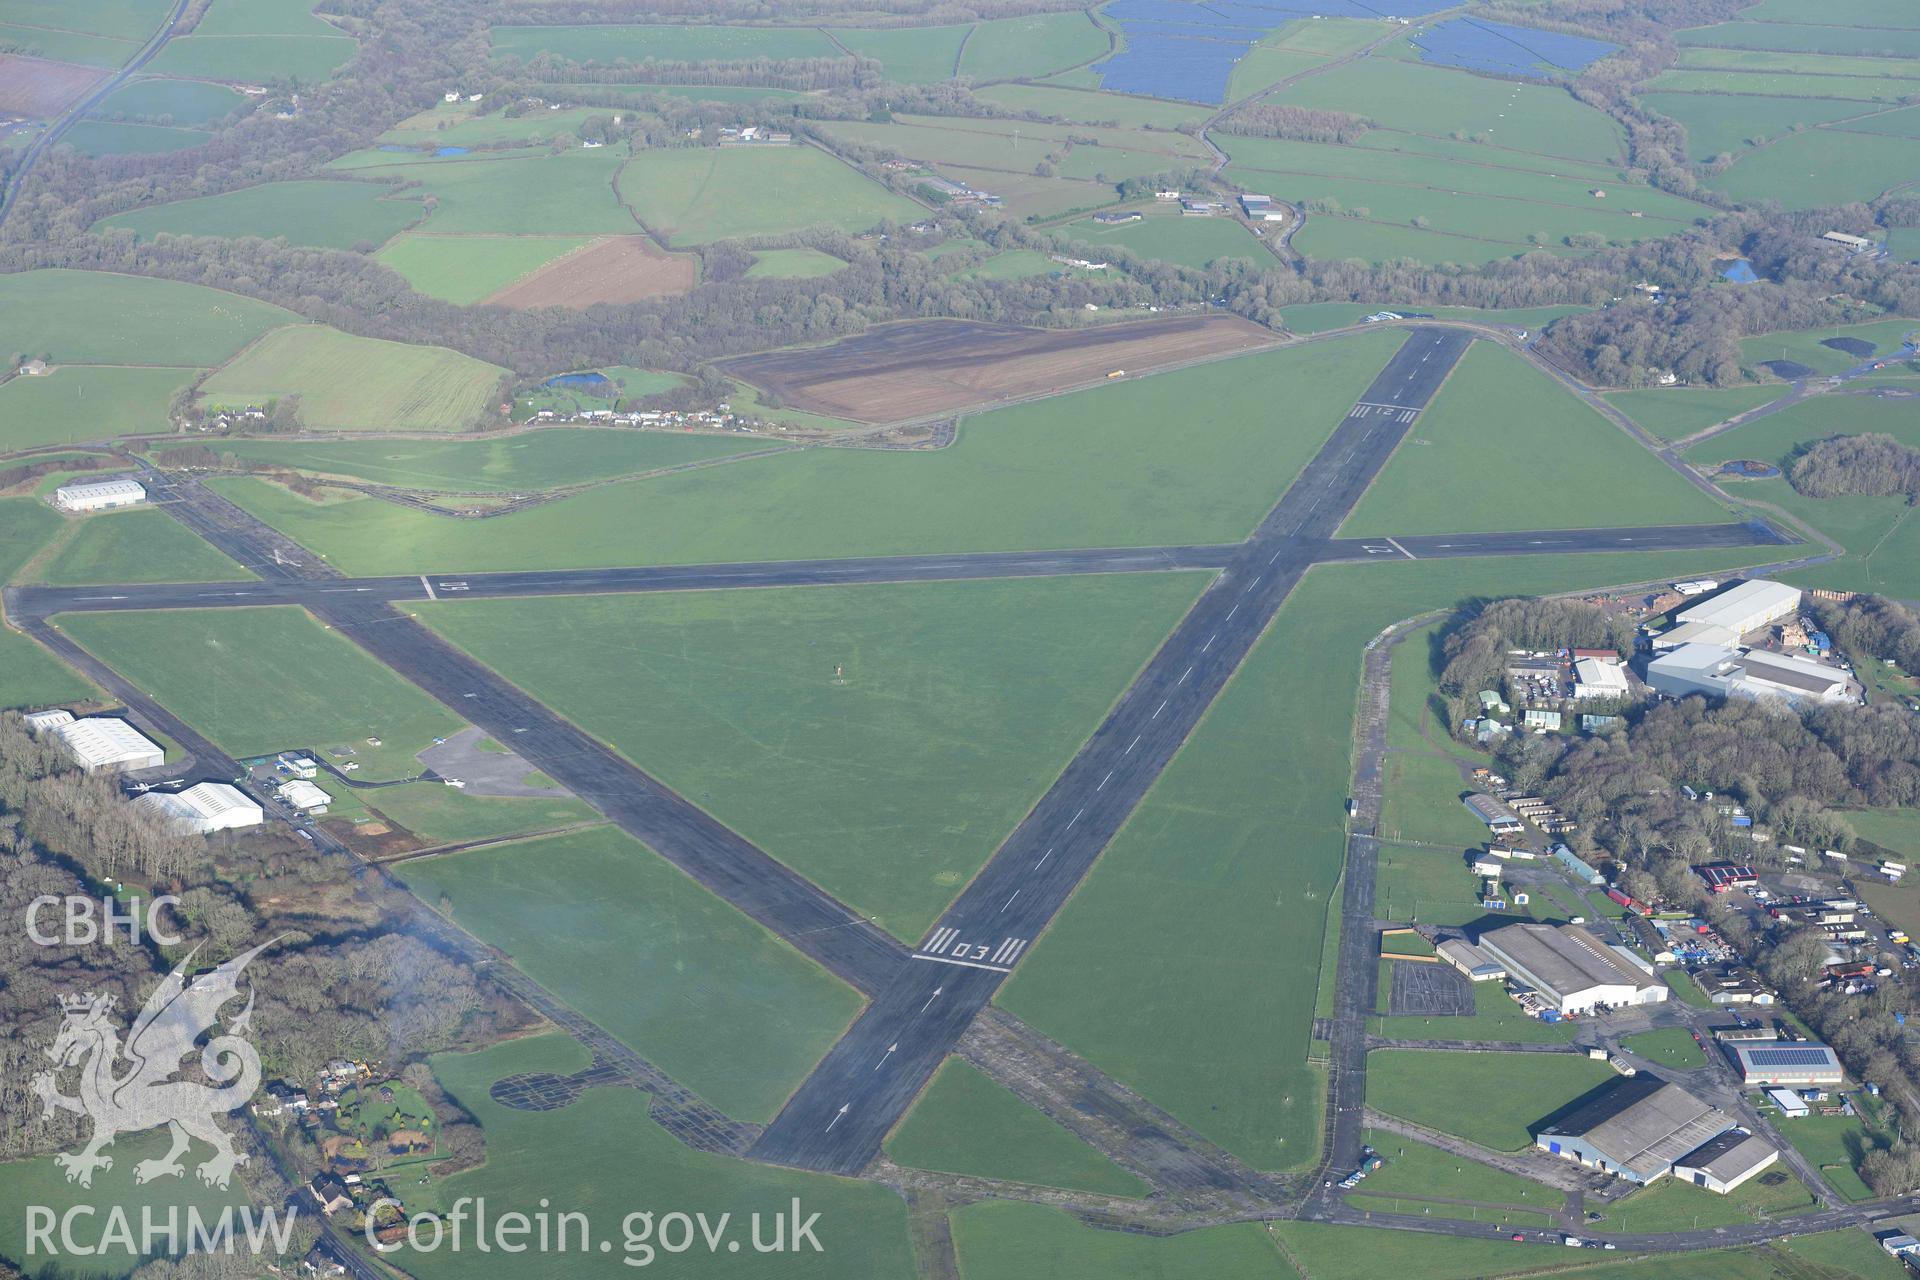 Oblique aerial photograph of Haverfordwest Airport taken during the Royal Commission